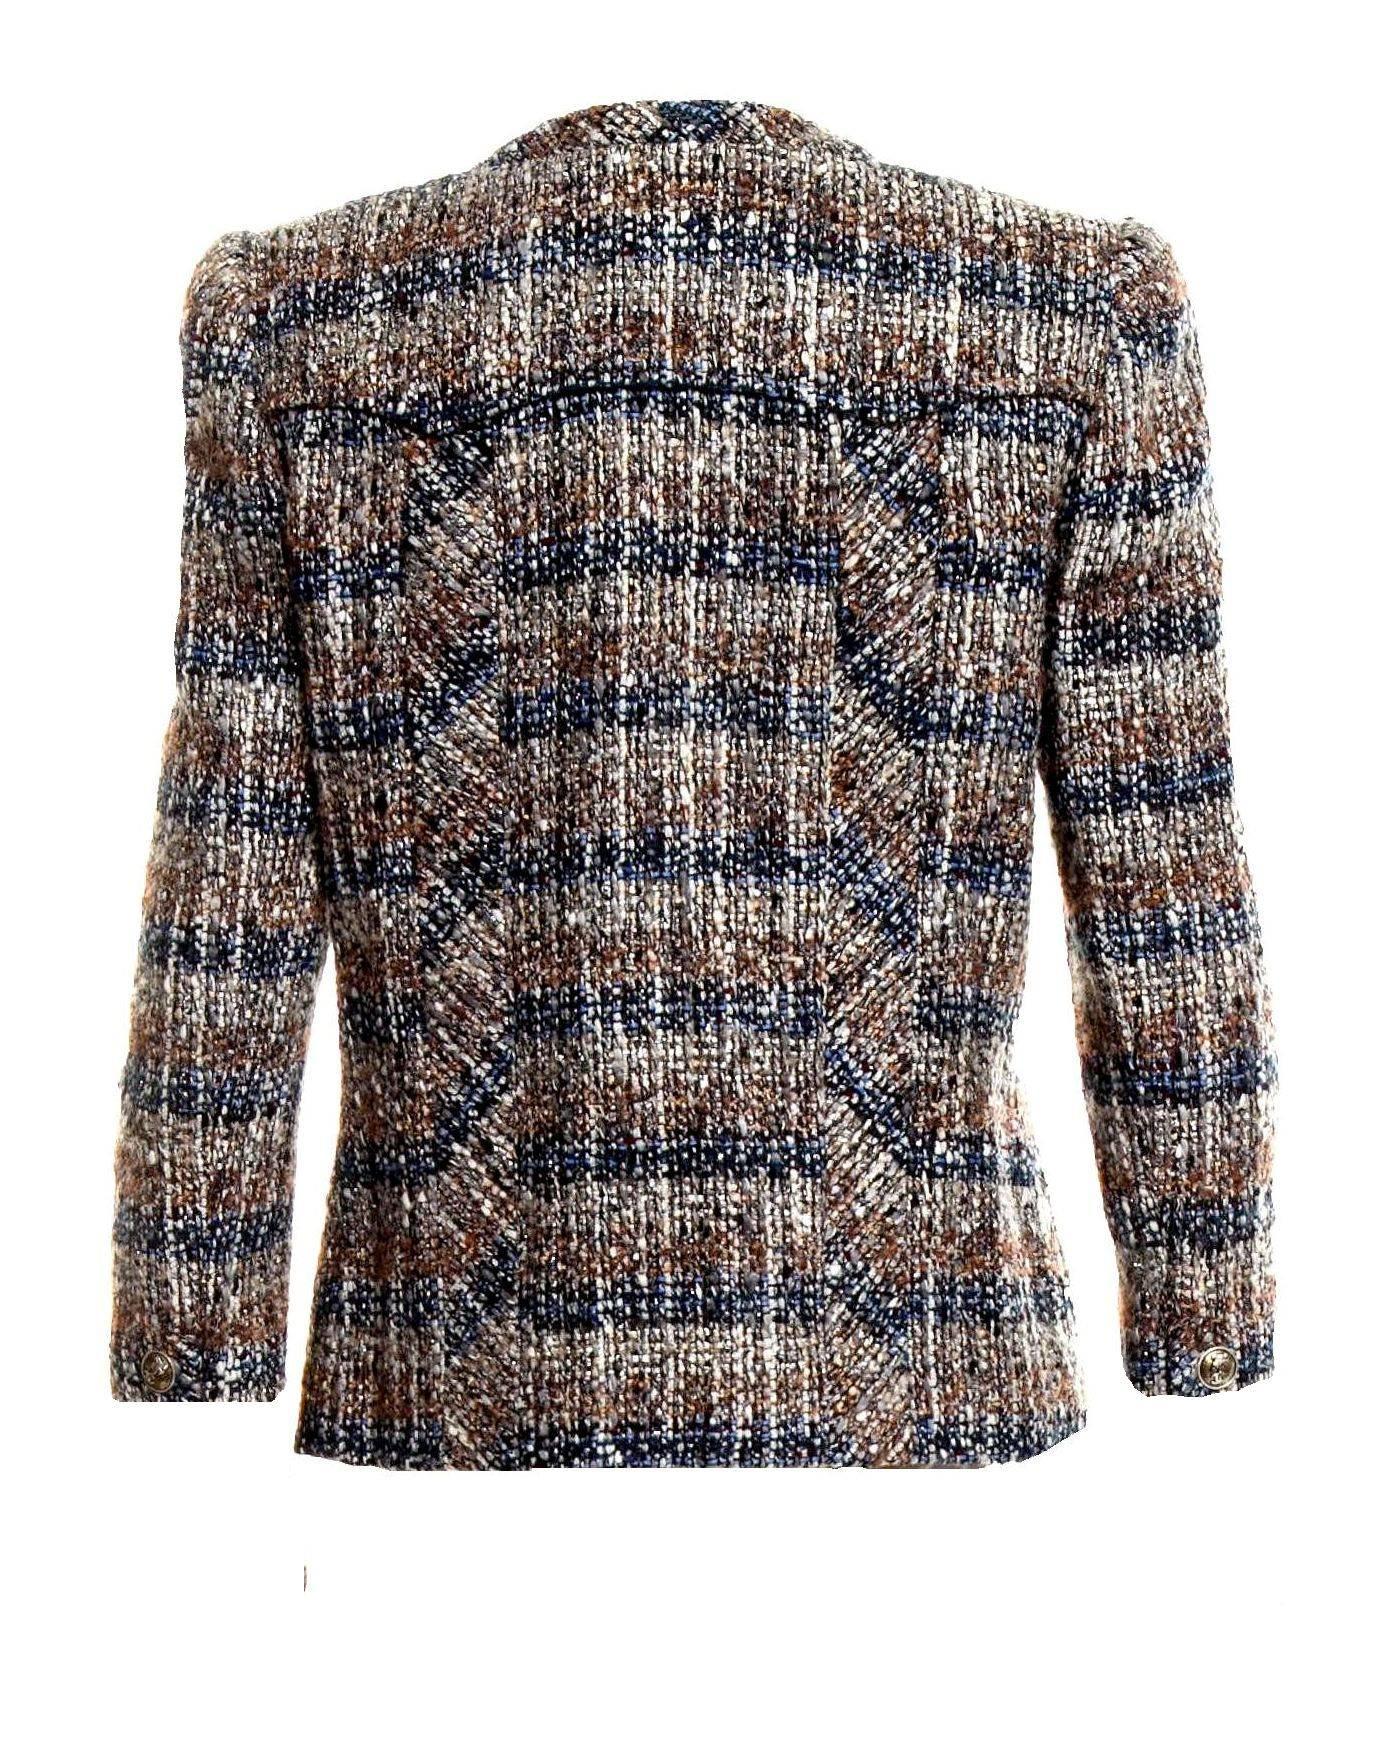 Beautiful CHANEL fantasy tweed jacket
A true CHANEL signature item that will last you for many years
Stunning colors, so versatile, perfect with jeans!
Closes in front with zip closure
Amazing metallic tweed fabric
Beautiful CC Chanel logo buttons